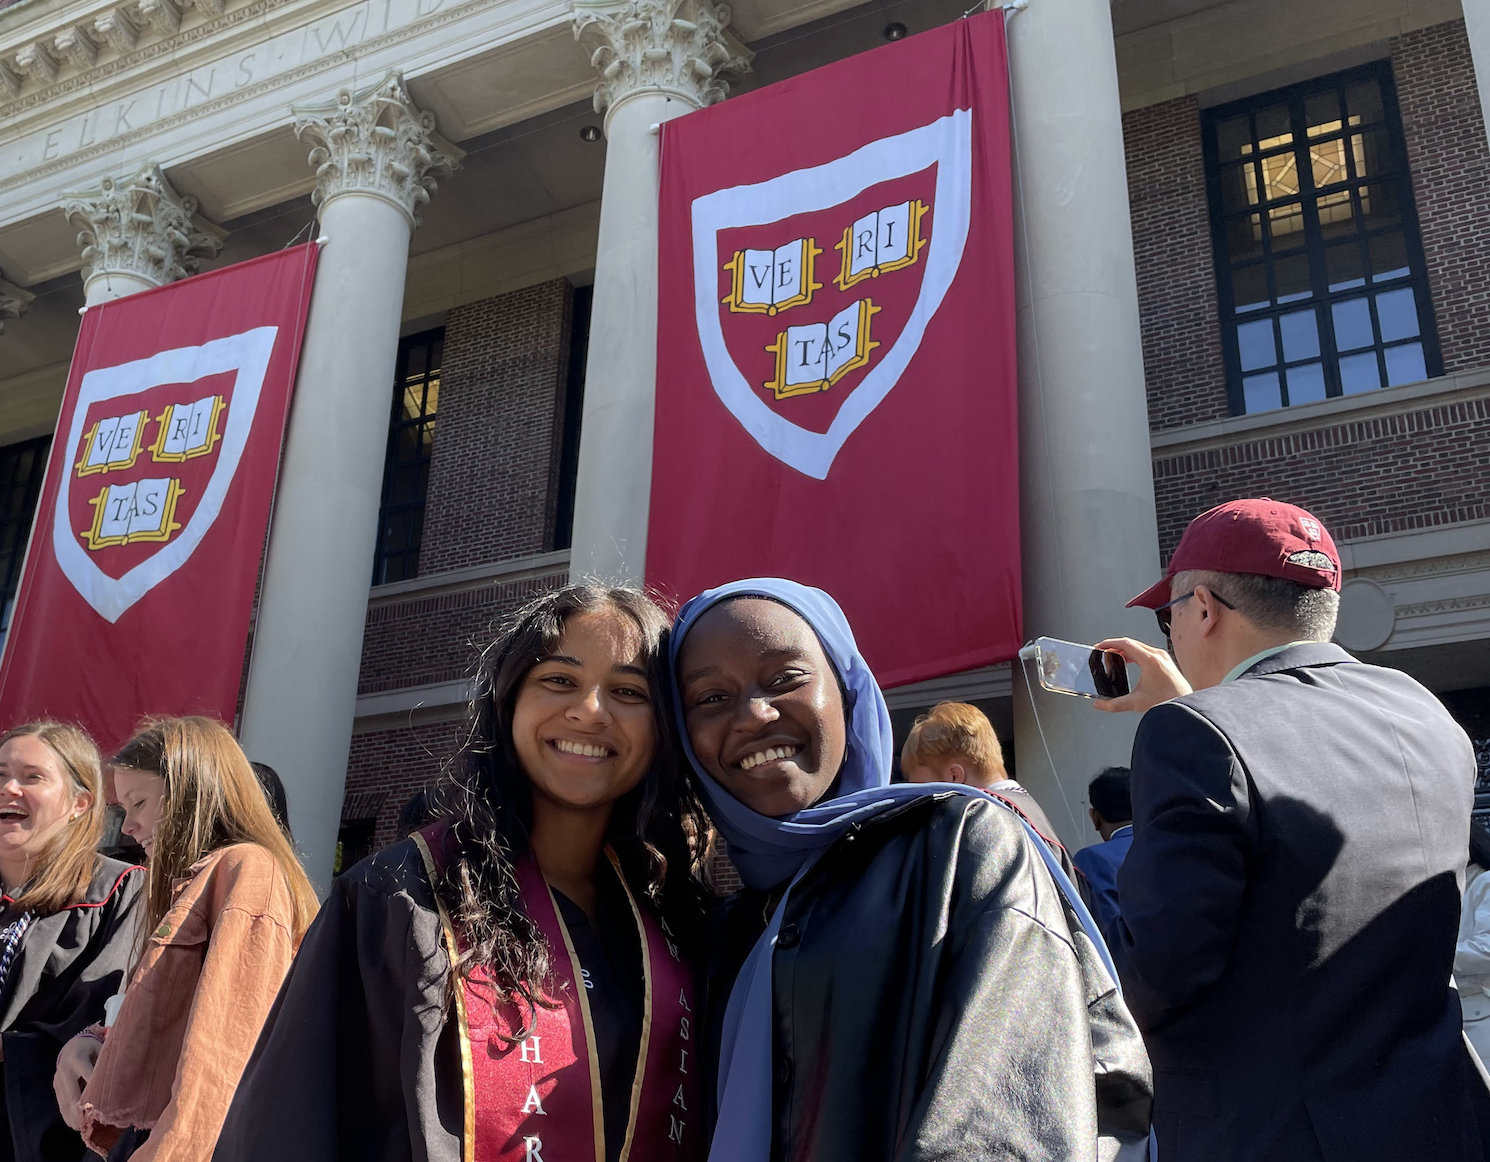 Shruthi in graduation robes with her host sister, smiling in front of a graduation banner